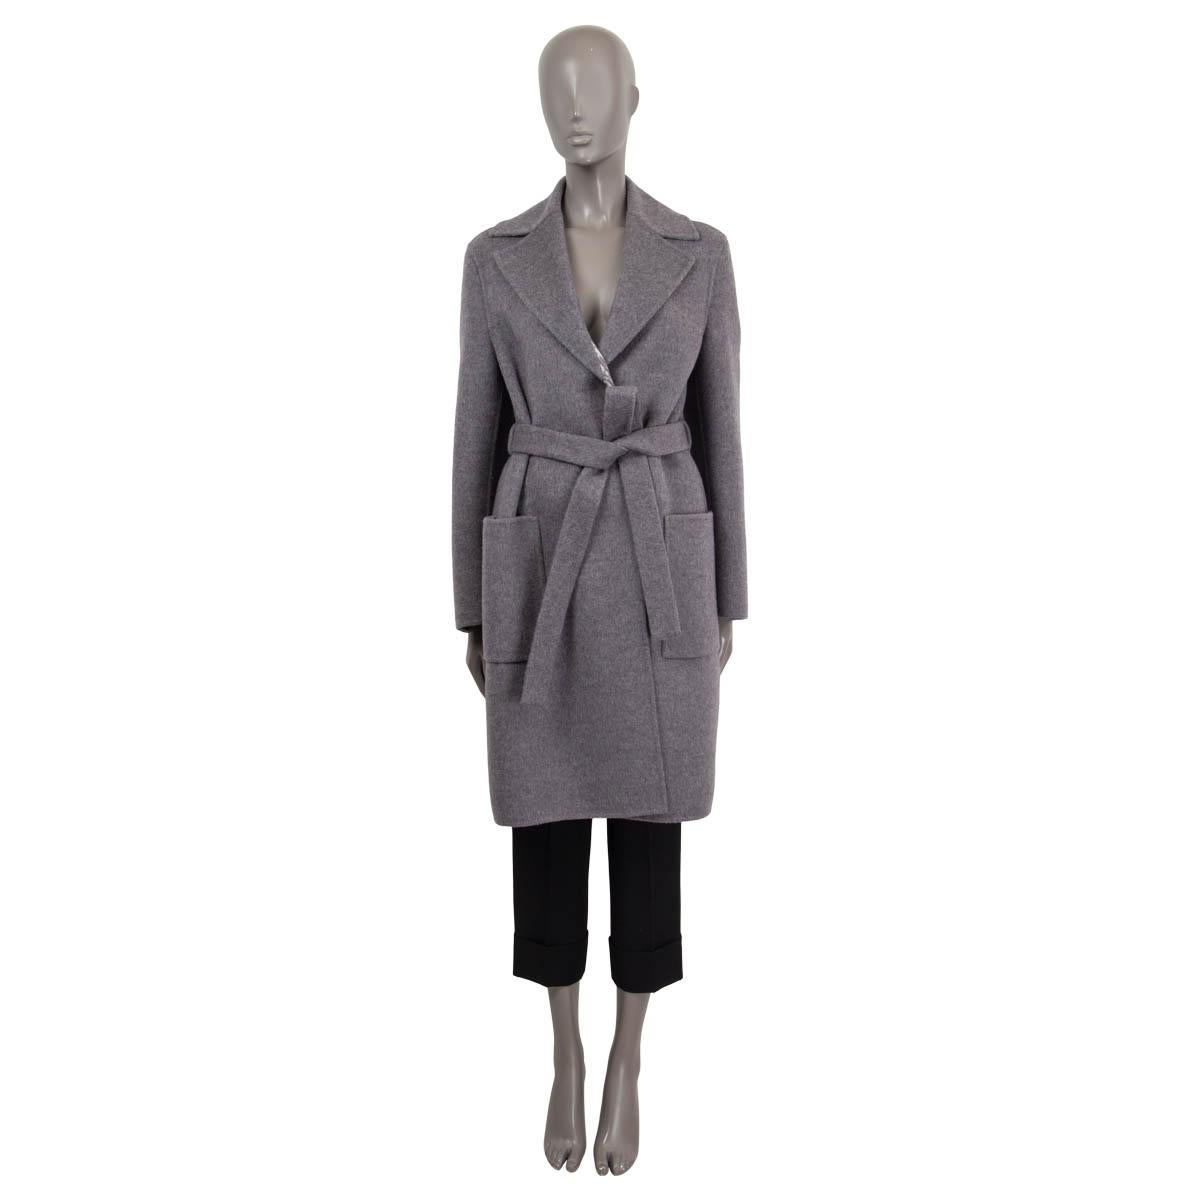 100% authentic Christian Dior 2021 double sided coat in gray wool (99%) and silk (1%) (please note content tag is missing). Features two patch pockets on the front, long sleeves and the Dior monogram in gray and off-white on the inside. Opens with a